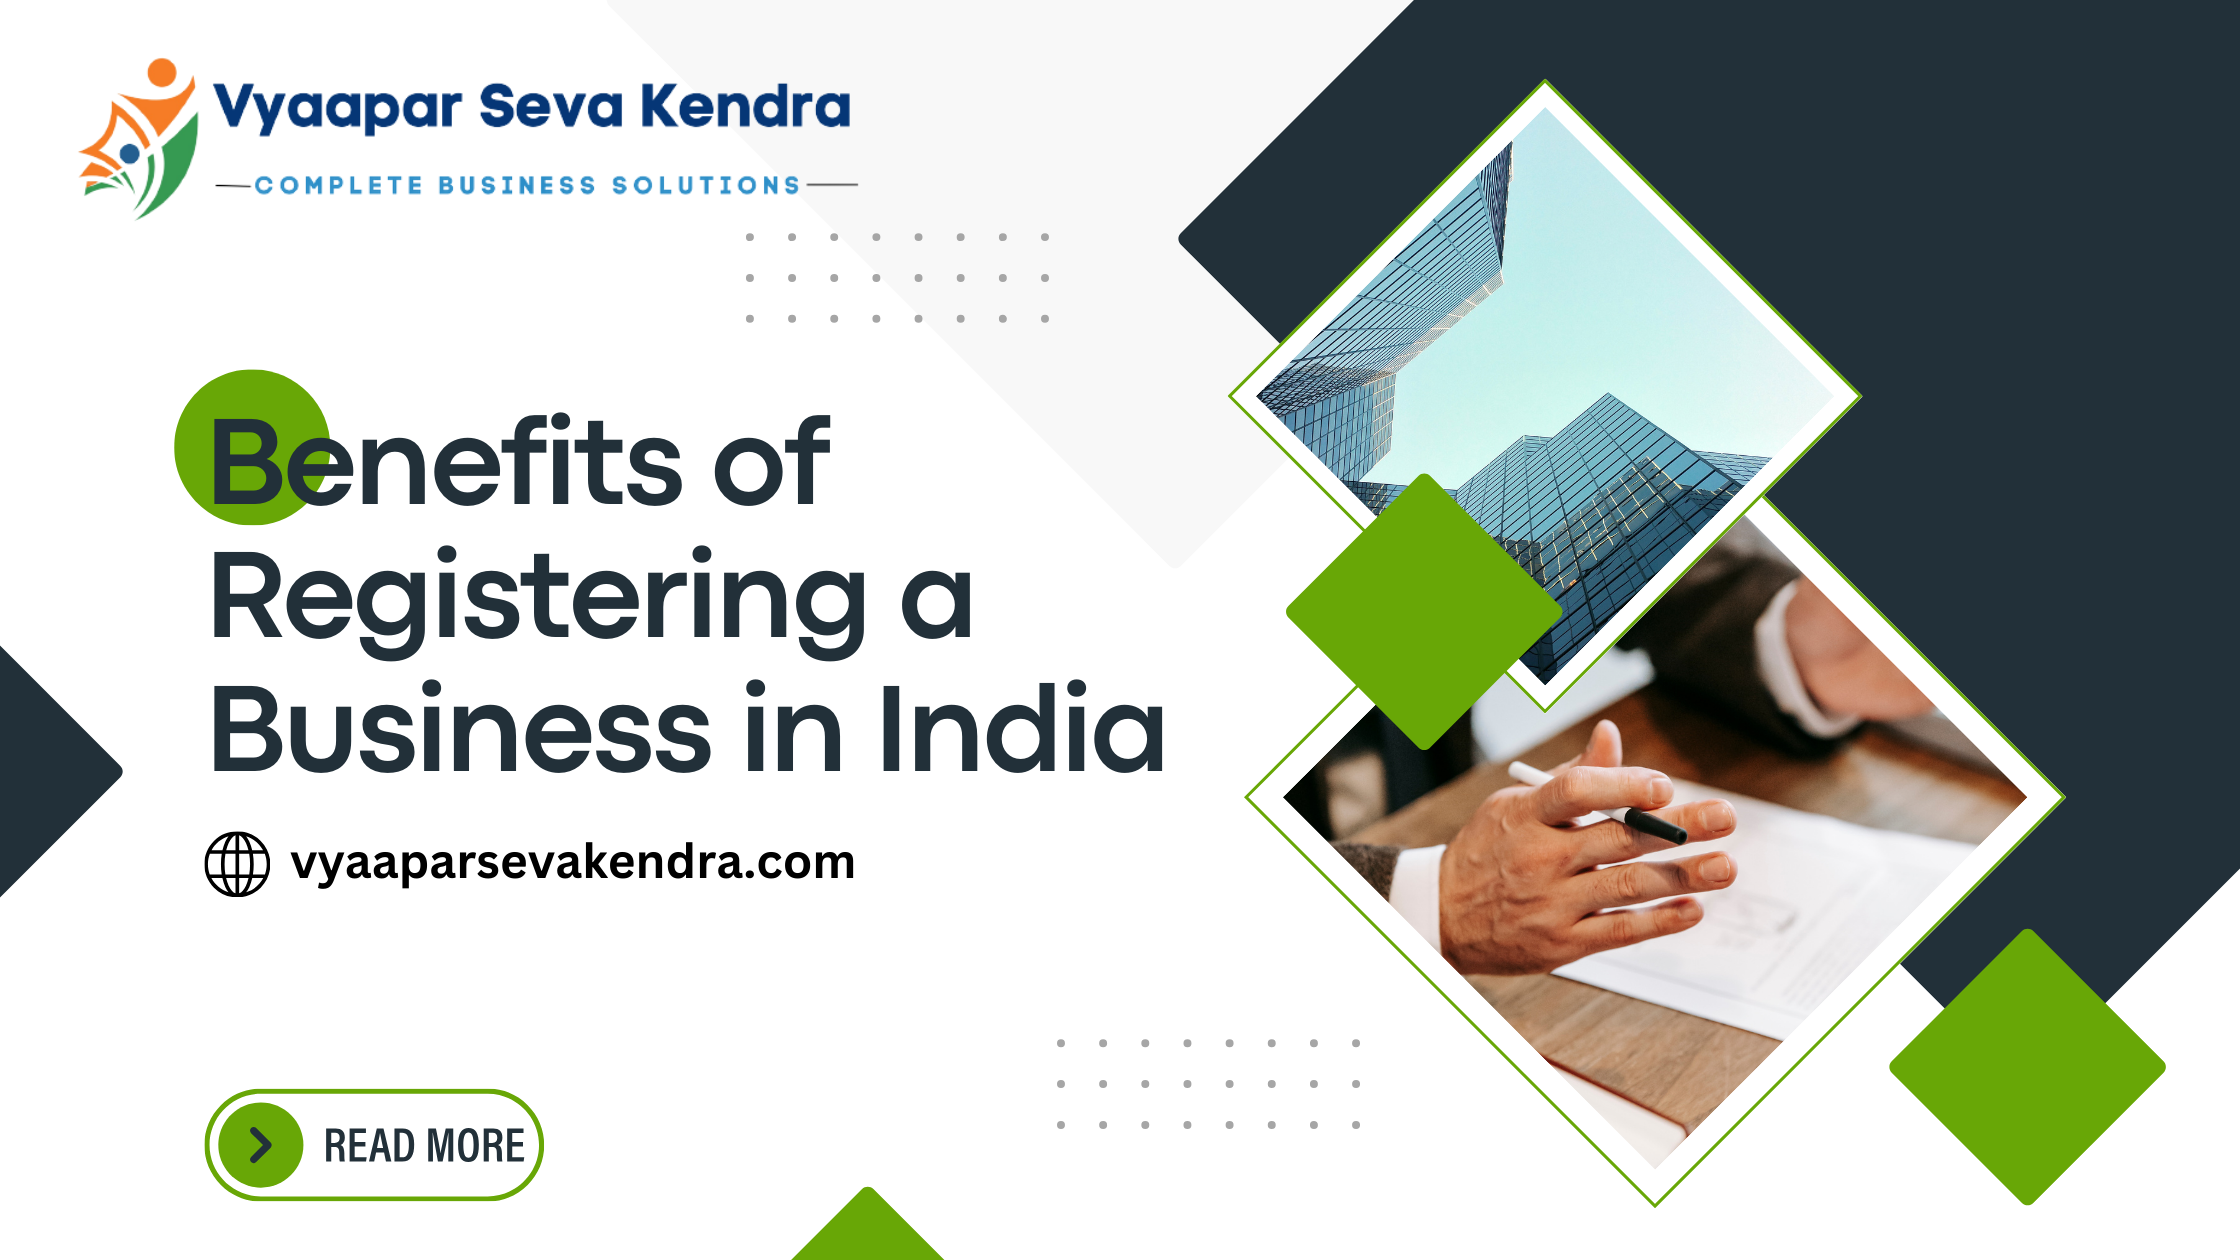 Benefits of Registering a Business in India